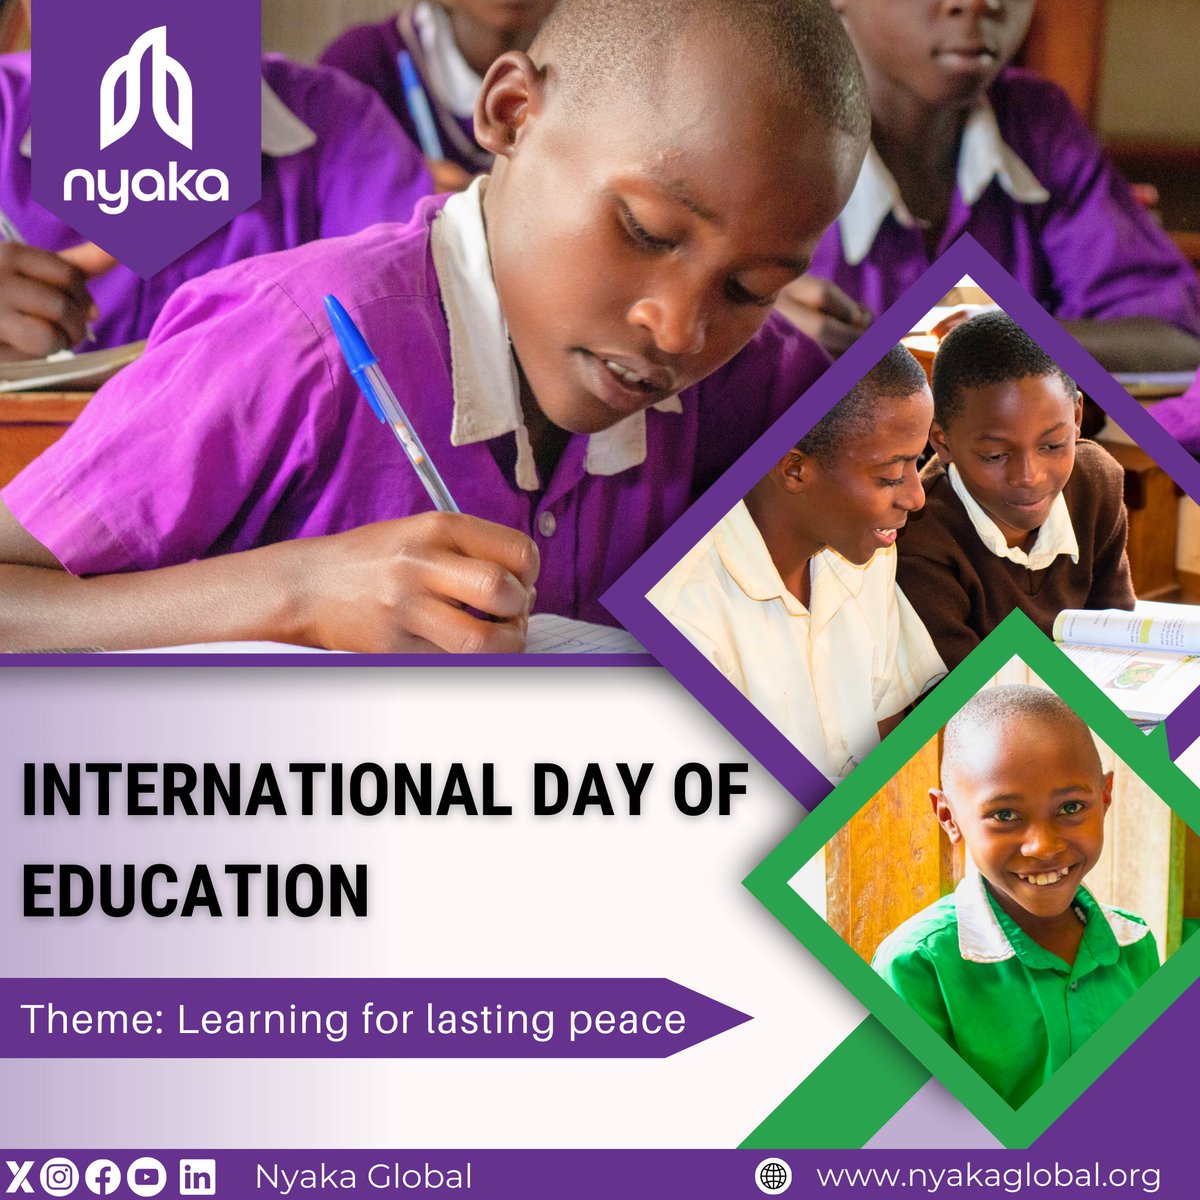 Nyaka joins the world in celebrating #InternationalDayofEducation! 

We reaffirm our commitment to providing quality education to vulnerable children so they can learn, grow, and thrive, becoming peaceful citizens in society.

#NyakaLearners @UNESCO @unescoug